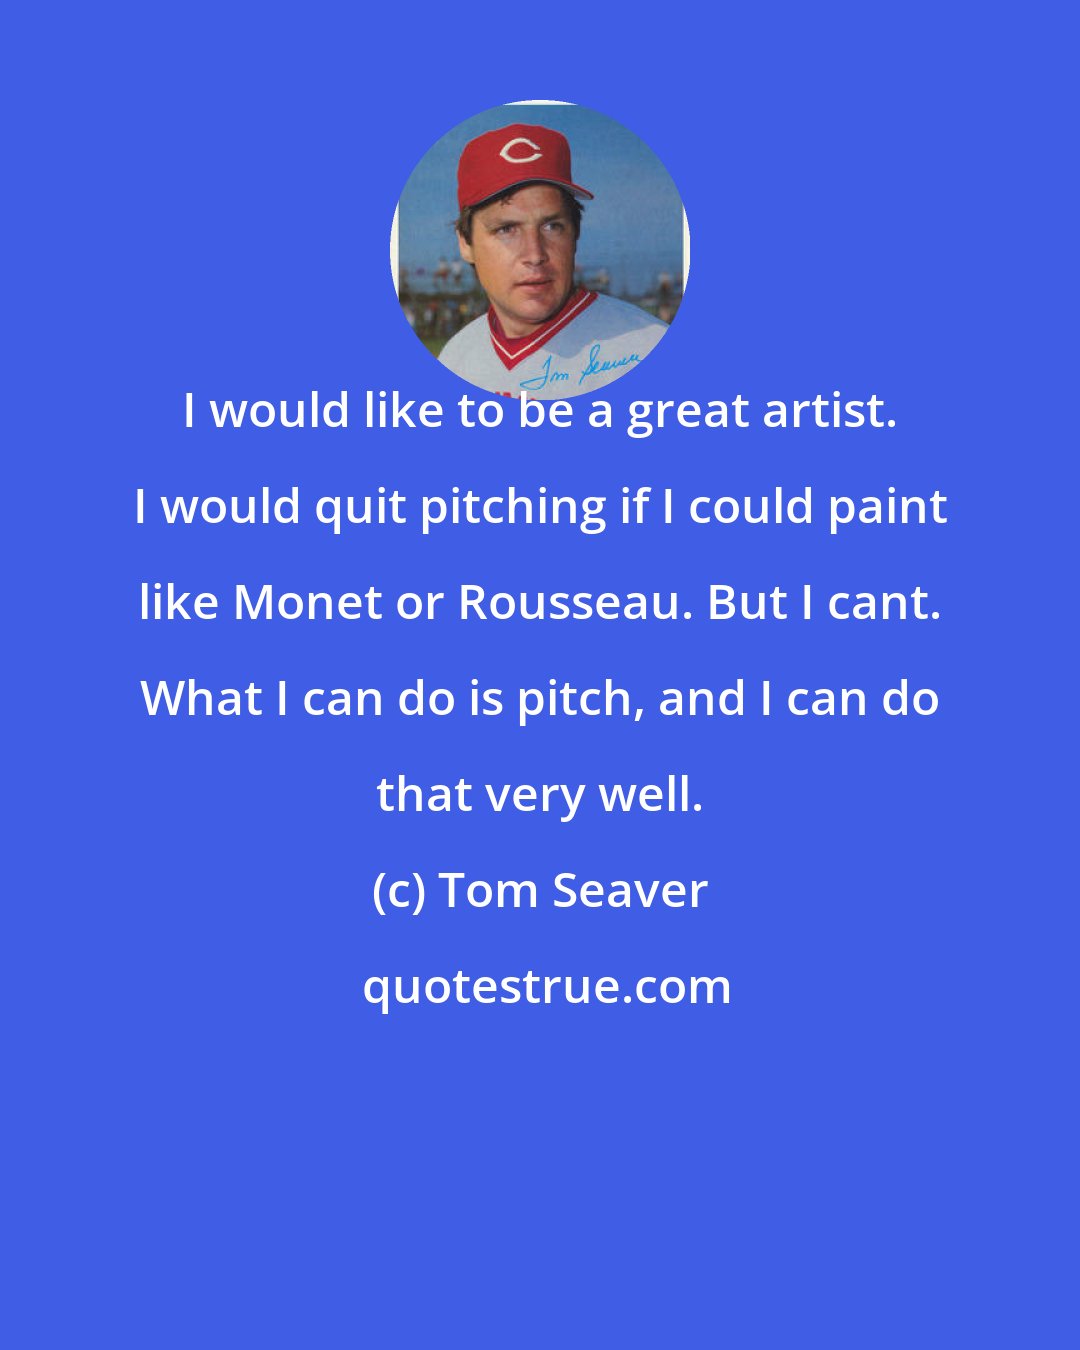 Tom Seaver: I would like to be a great artist. I would quit pitching if I could paint like Monet or Rousseau. But I cant. What I can do is pitch, and I can do that very well.